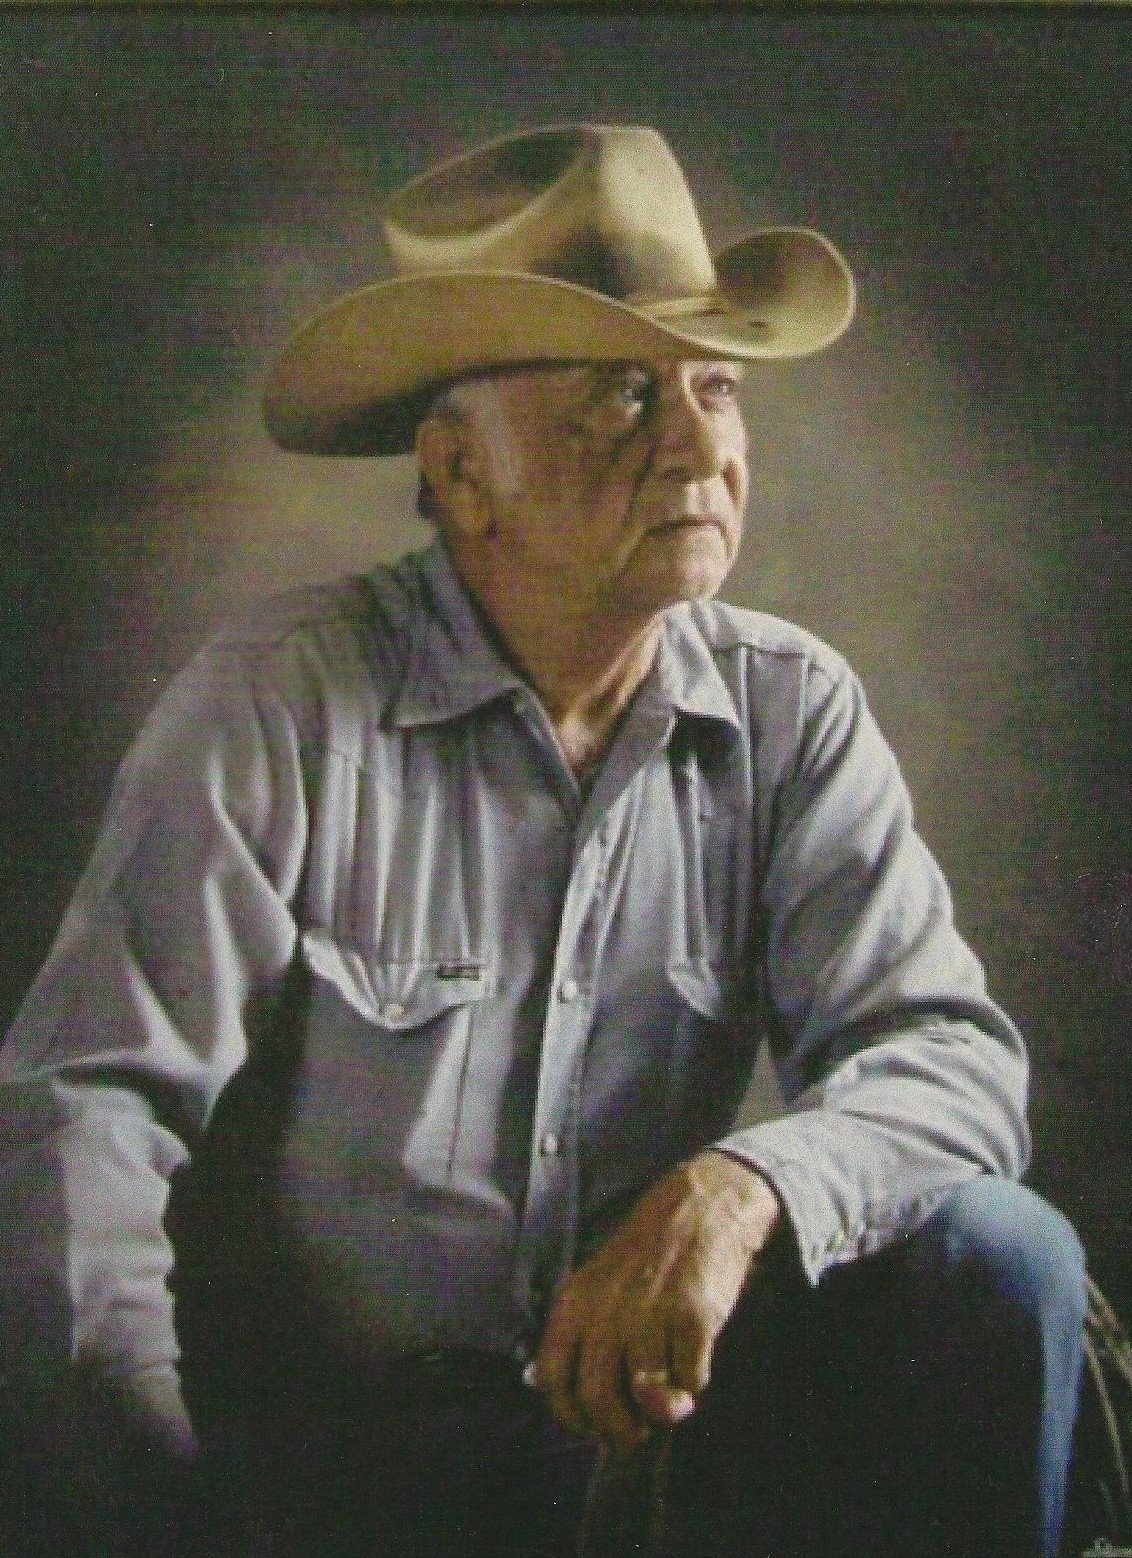 A portrait photo of a main in a cowboy hat